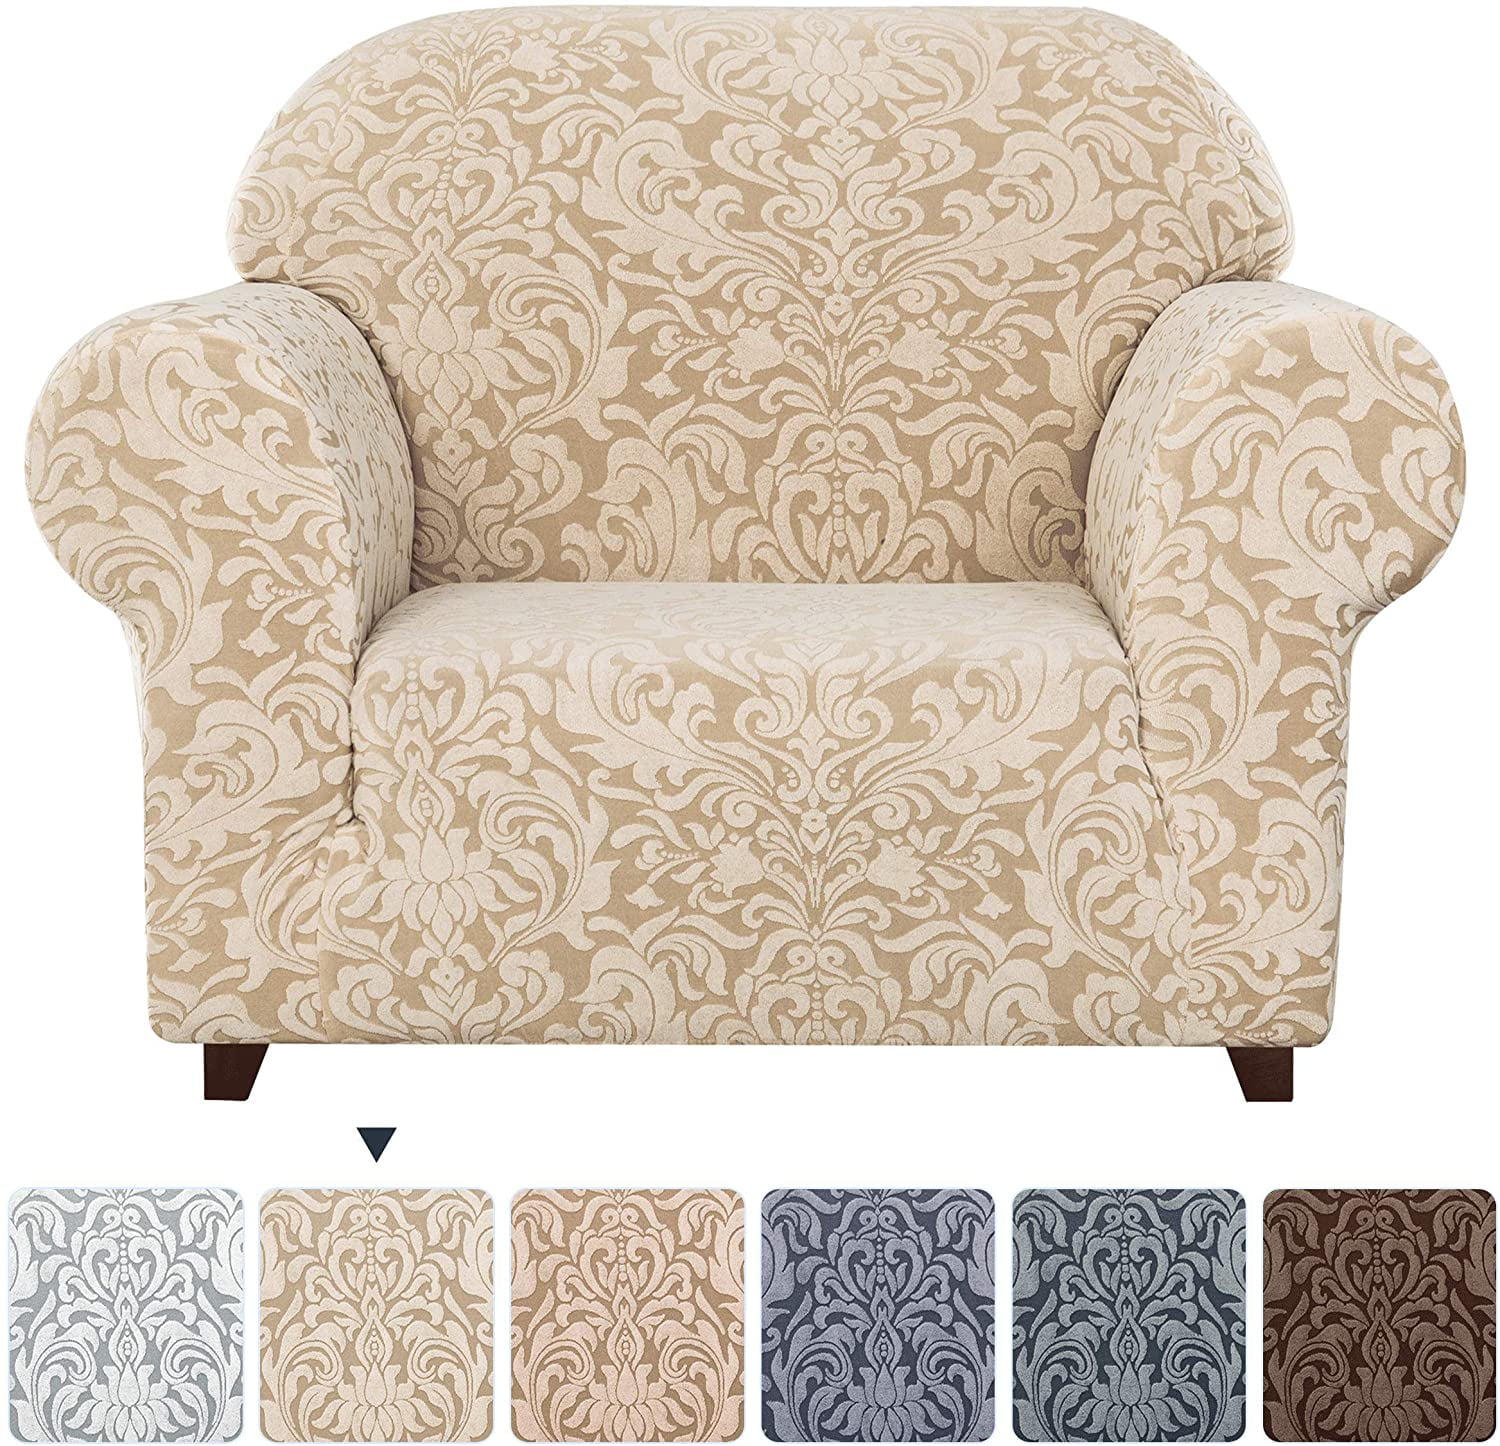 Corner Couch Cover - Sofa Cover - Sofa Slipcover - Cotton Fabric Slipcover - 1-Piece Form Fit Stretch Stylish Furniture Cover - Jacquard 3D Collection